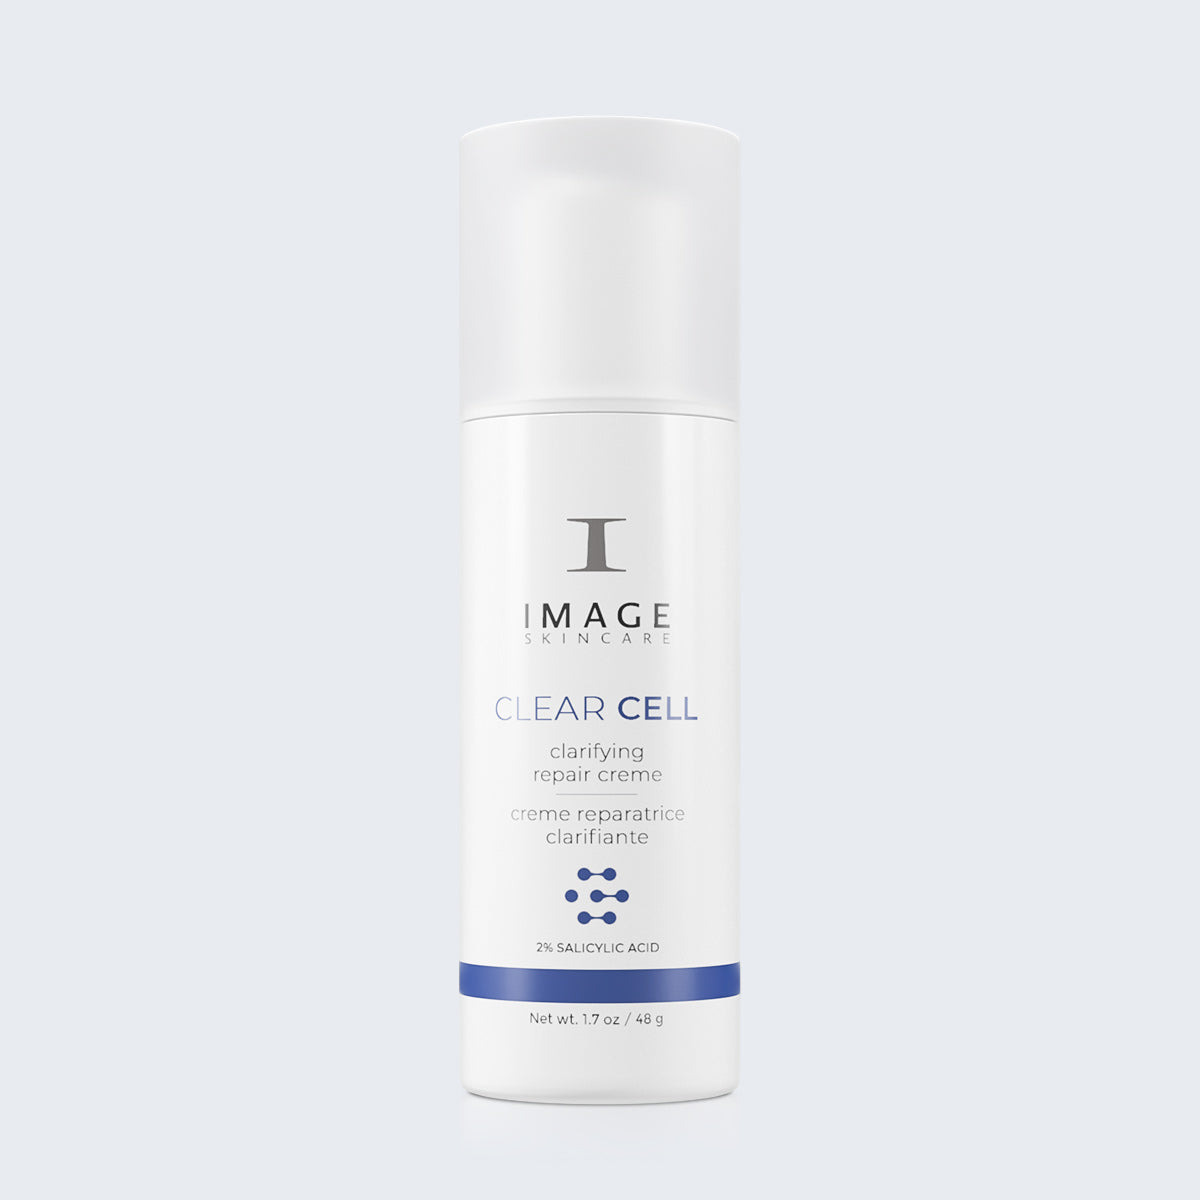 IMAGE | CLEAR CELL Clarifying Repair Creme (1.7 oz)